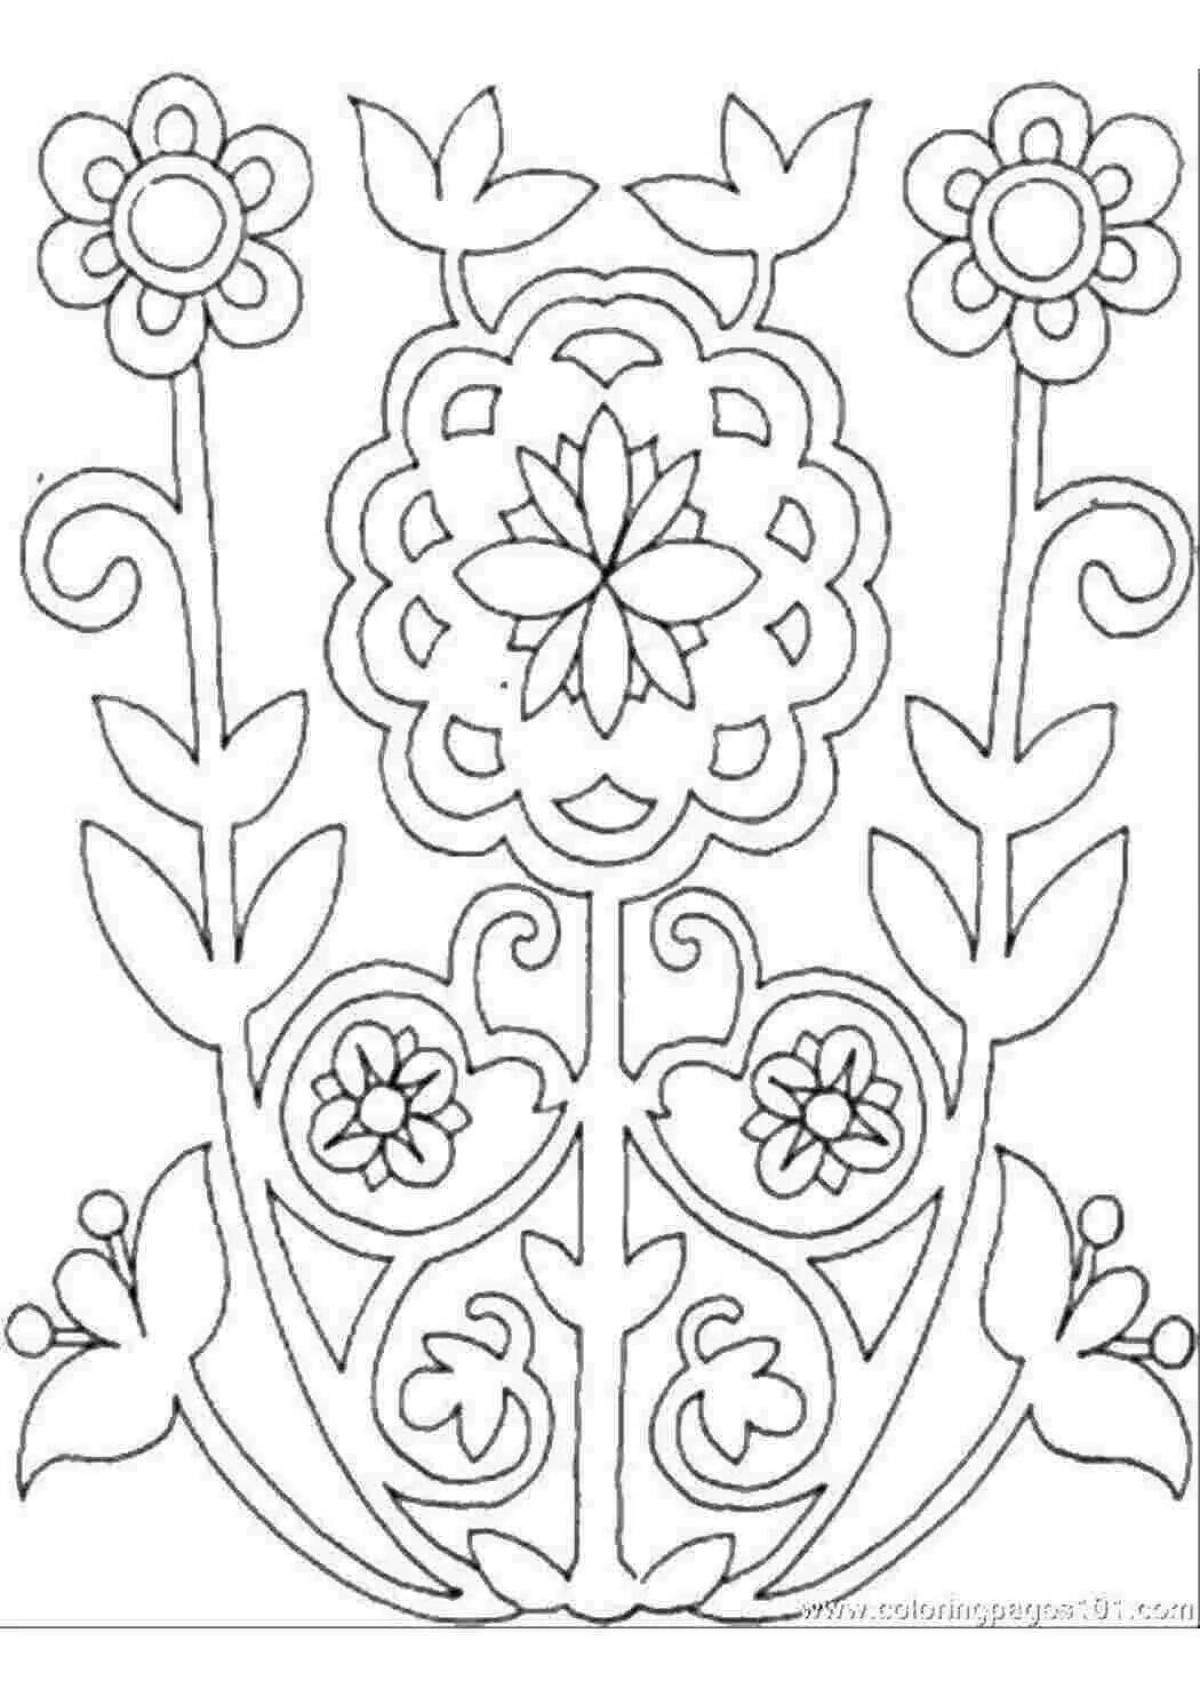 Great coloring pages and ornaments for kids